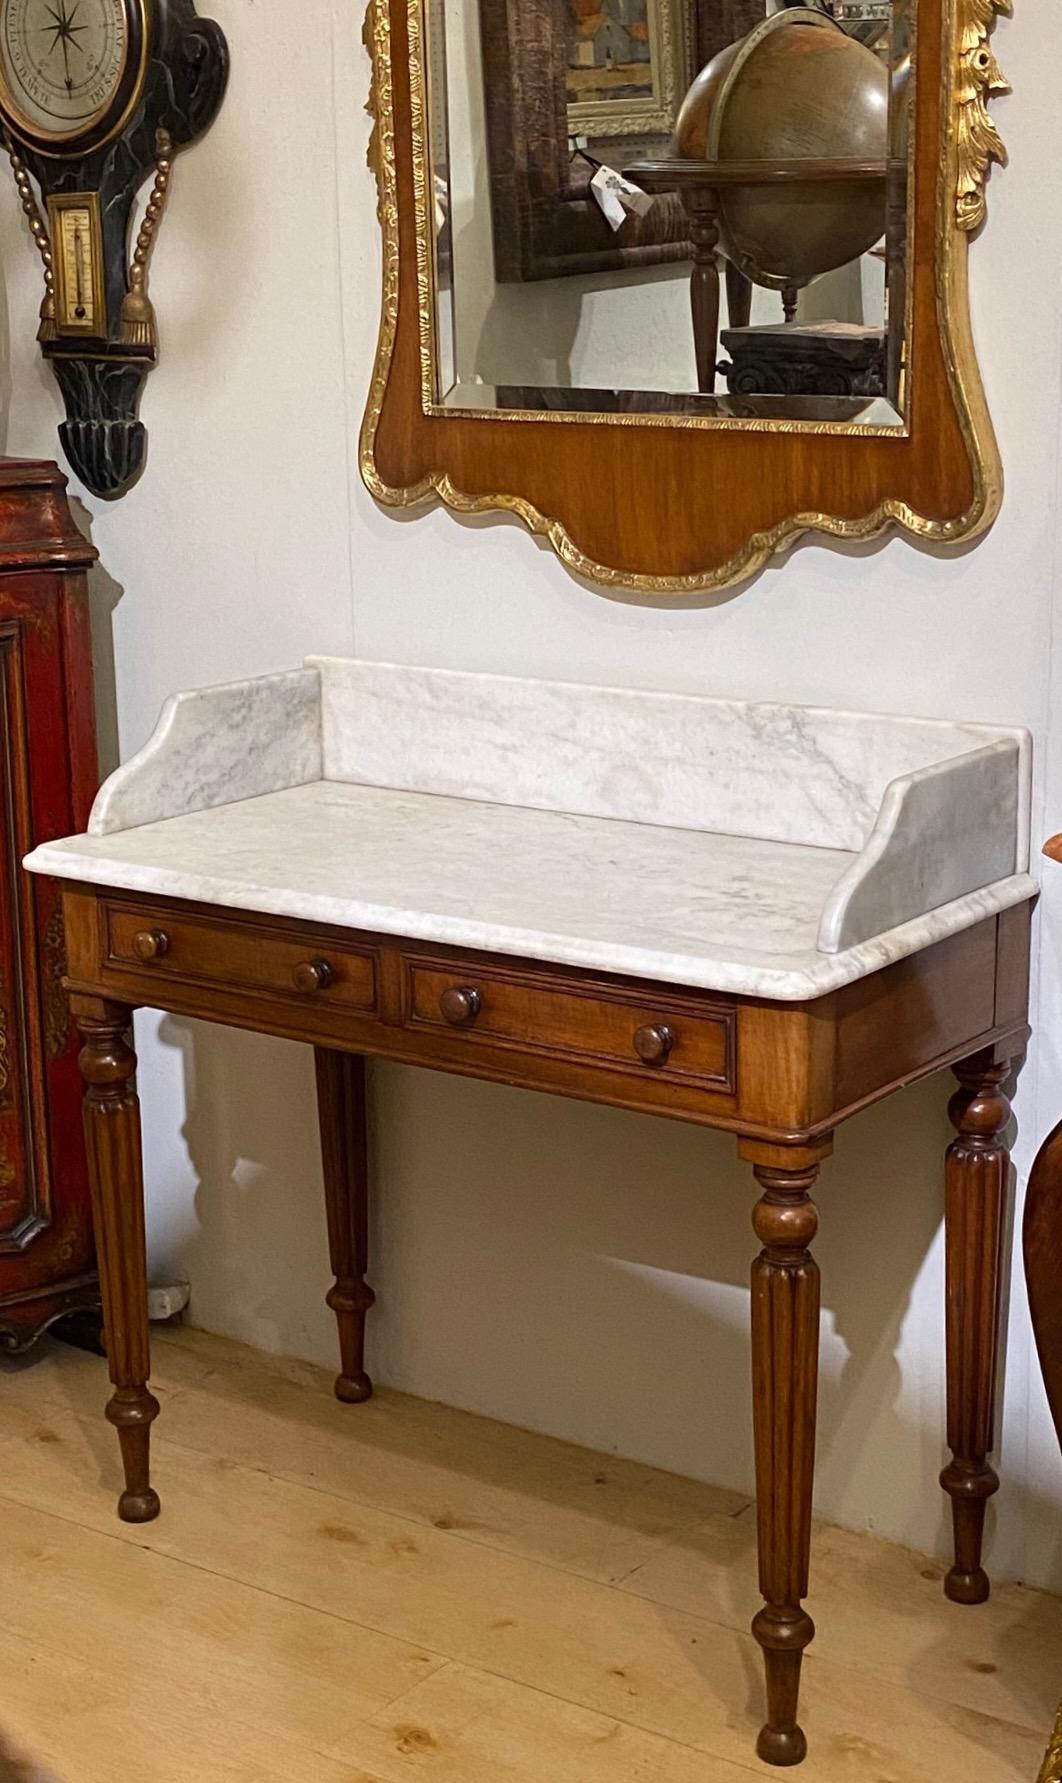 This mahogany wash stand or dressing table features a traditional elegant design with a marble top over two drawers.
George IV period, early 19th century, England.
In excellent antique condition.